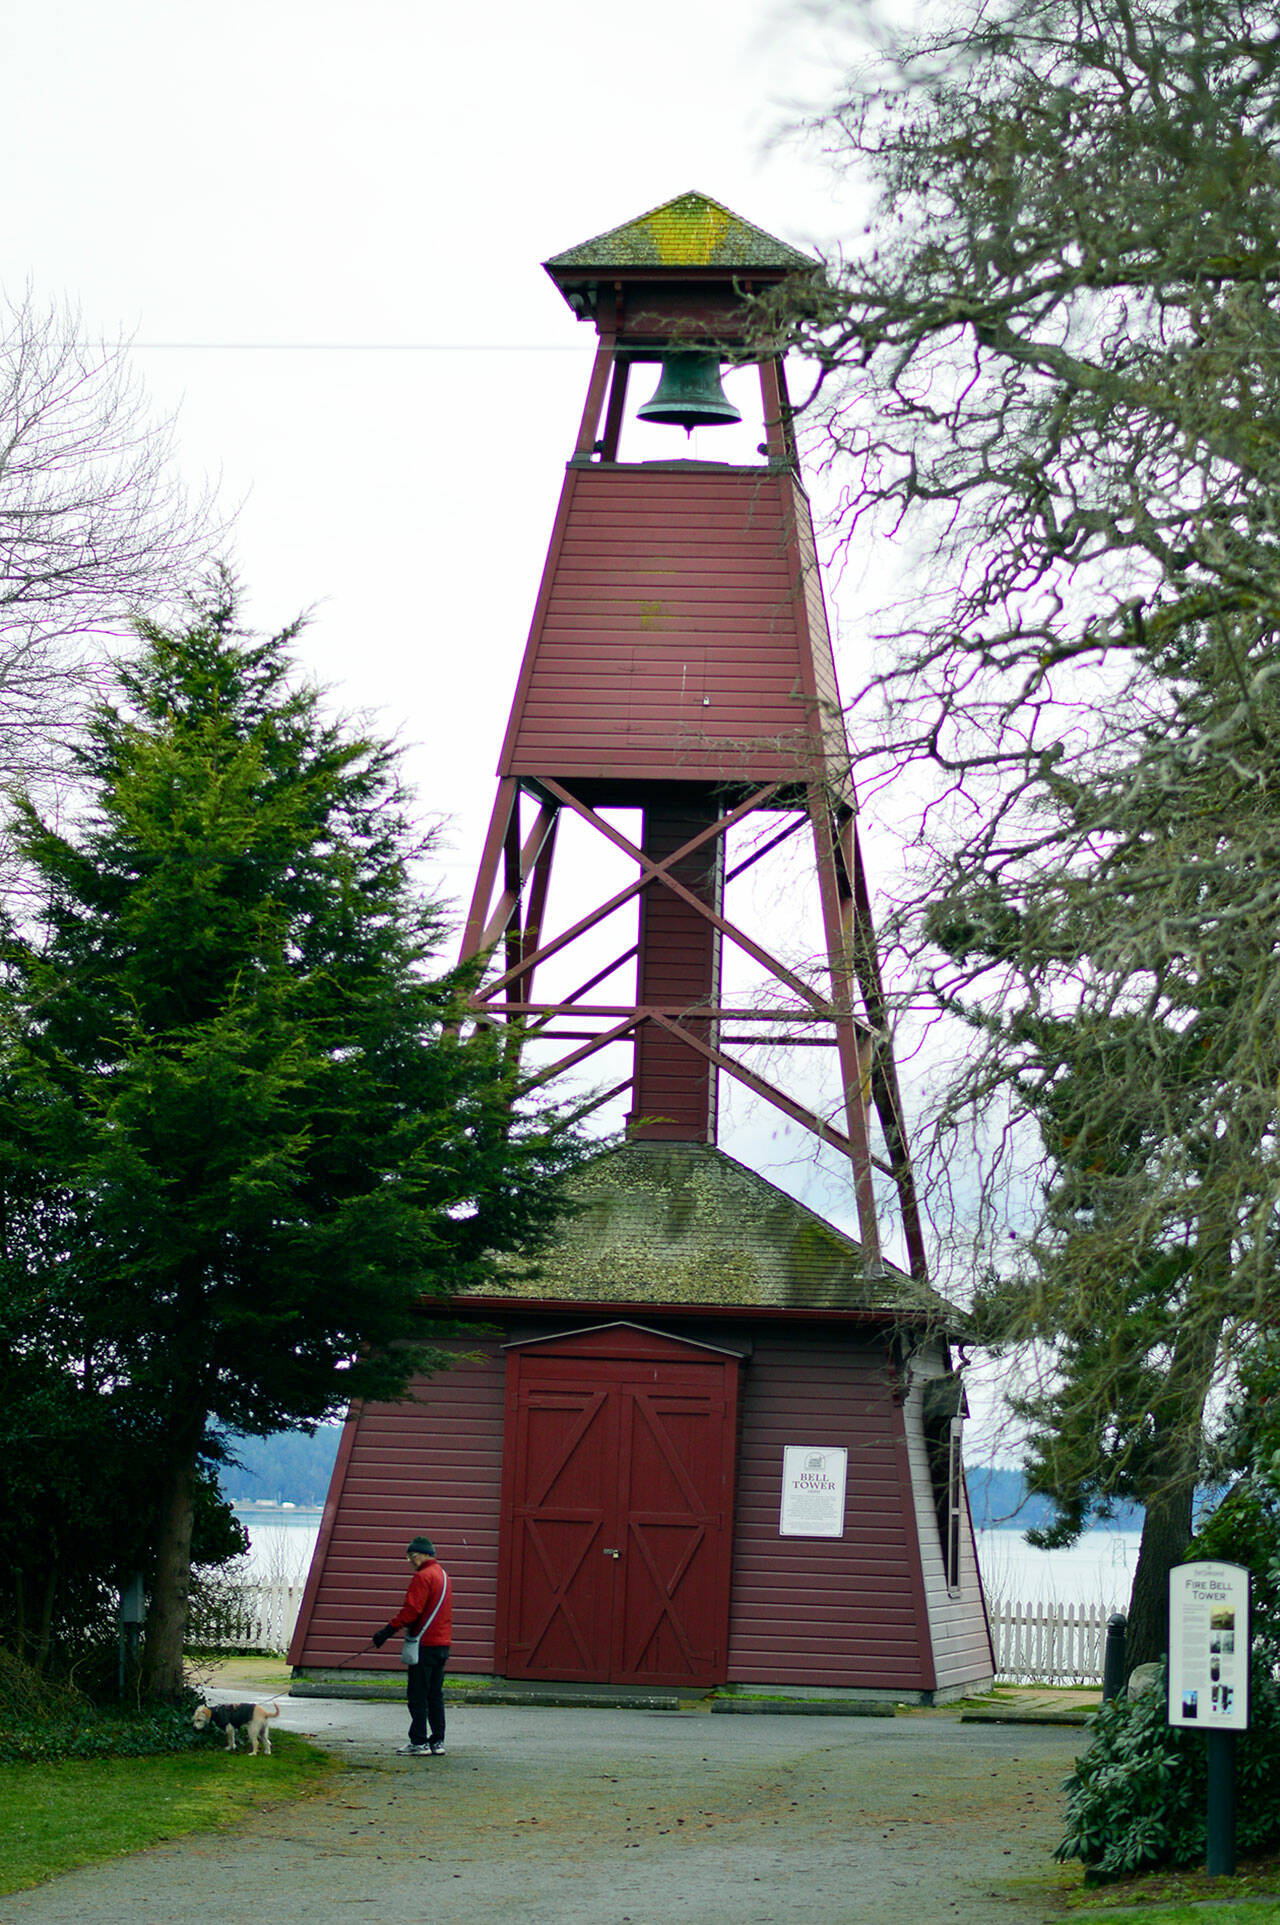 Port Townsend’s Fire Bell Tower stands over a city park that will soon receive some $15,000 in landscaping thanks to a donation accepted this week. (Diane Urbani de la Paz/Peninsula Daily News)